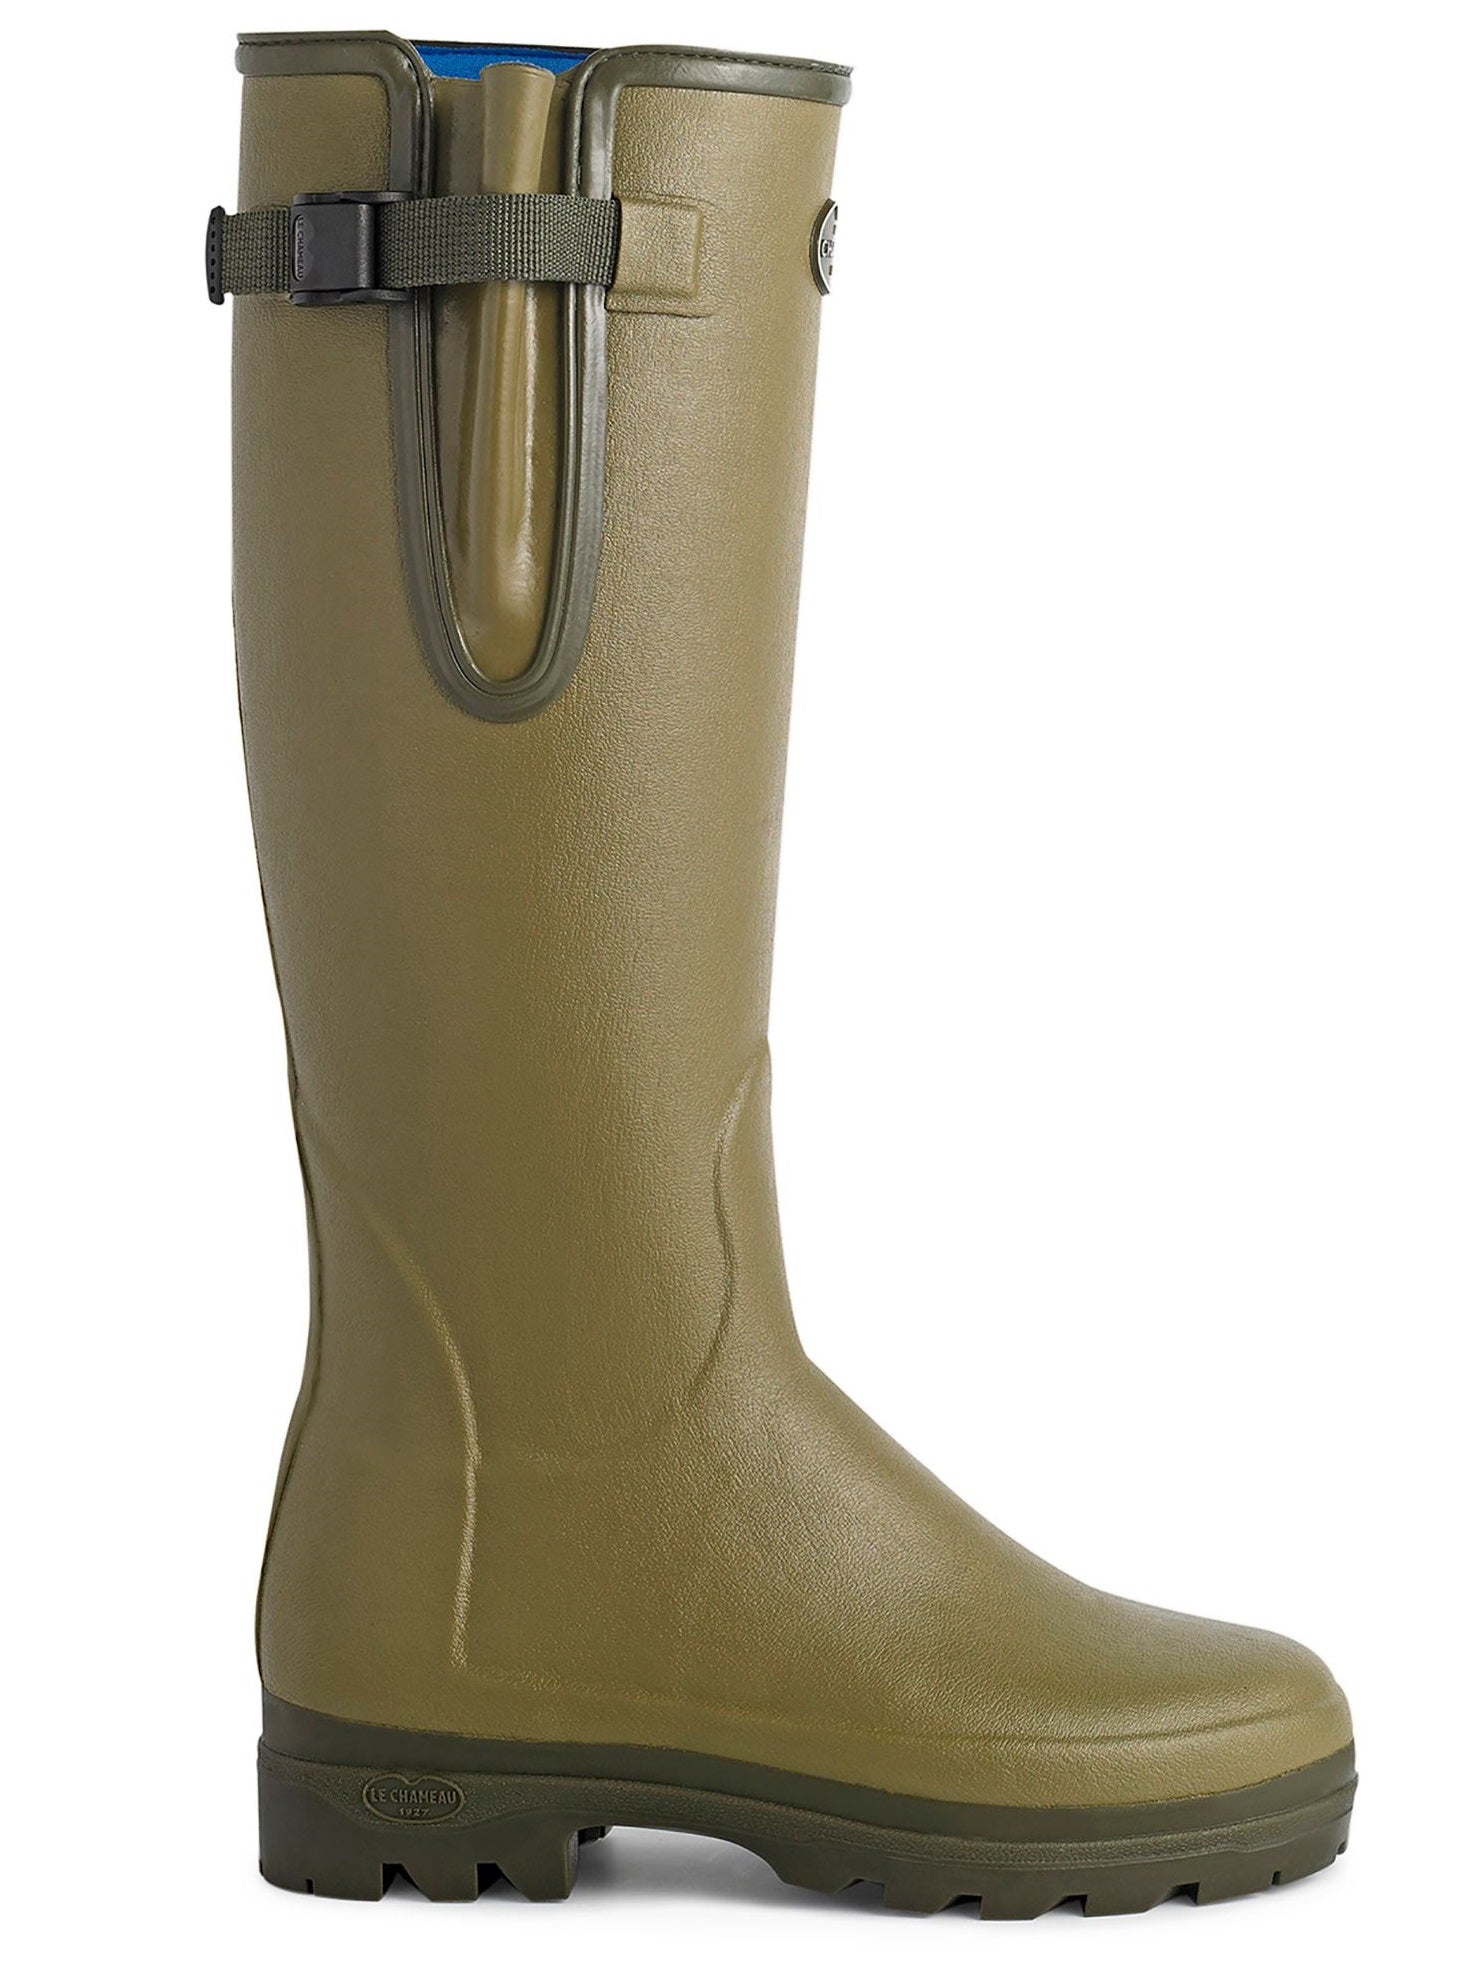 LE CHAMEAU Vierzonord Boots - Ladies Neoprene Lined - Iconic Green